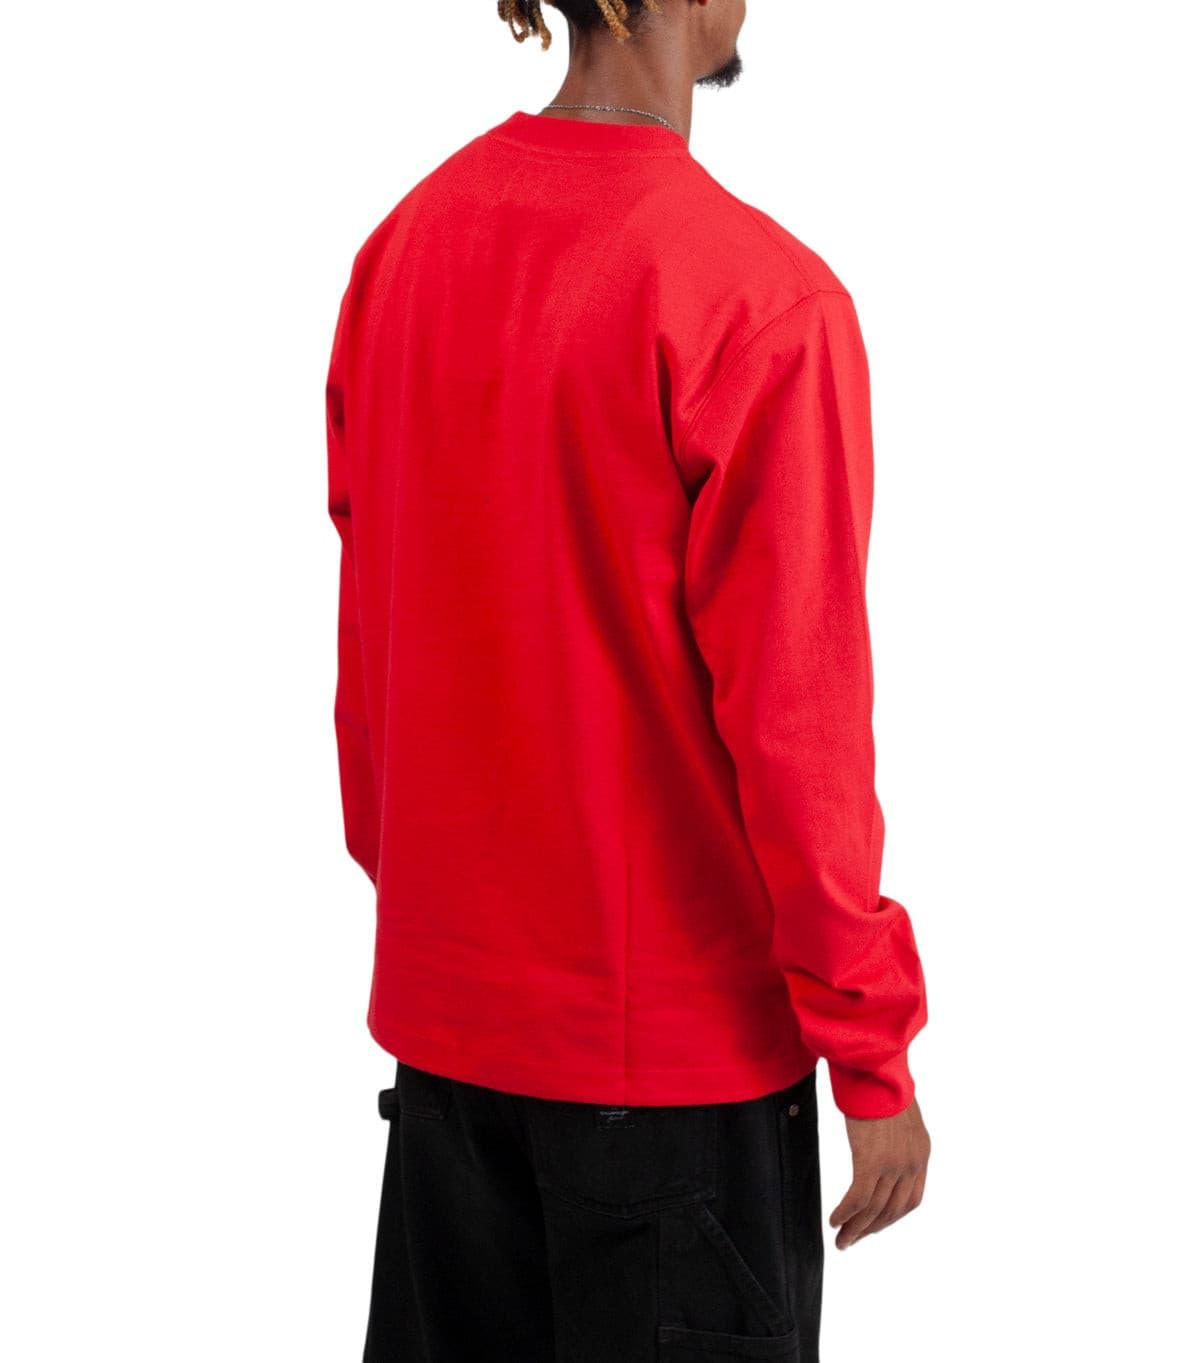 New Balance Made in USA Heritage Long Sleeve T-Shirt Red | SOMEWHERE